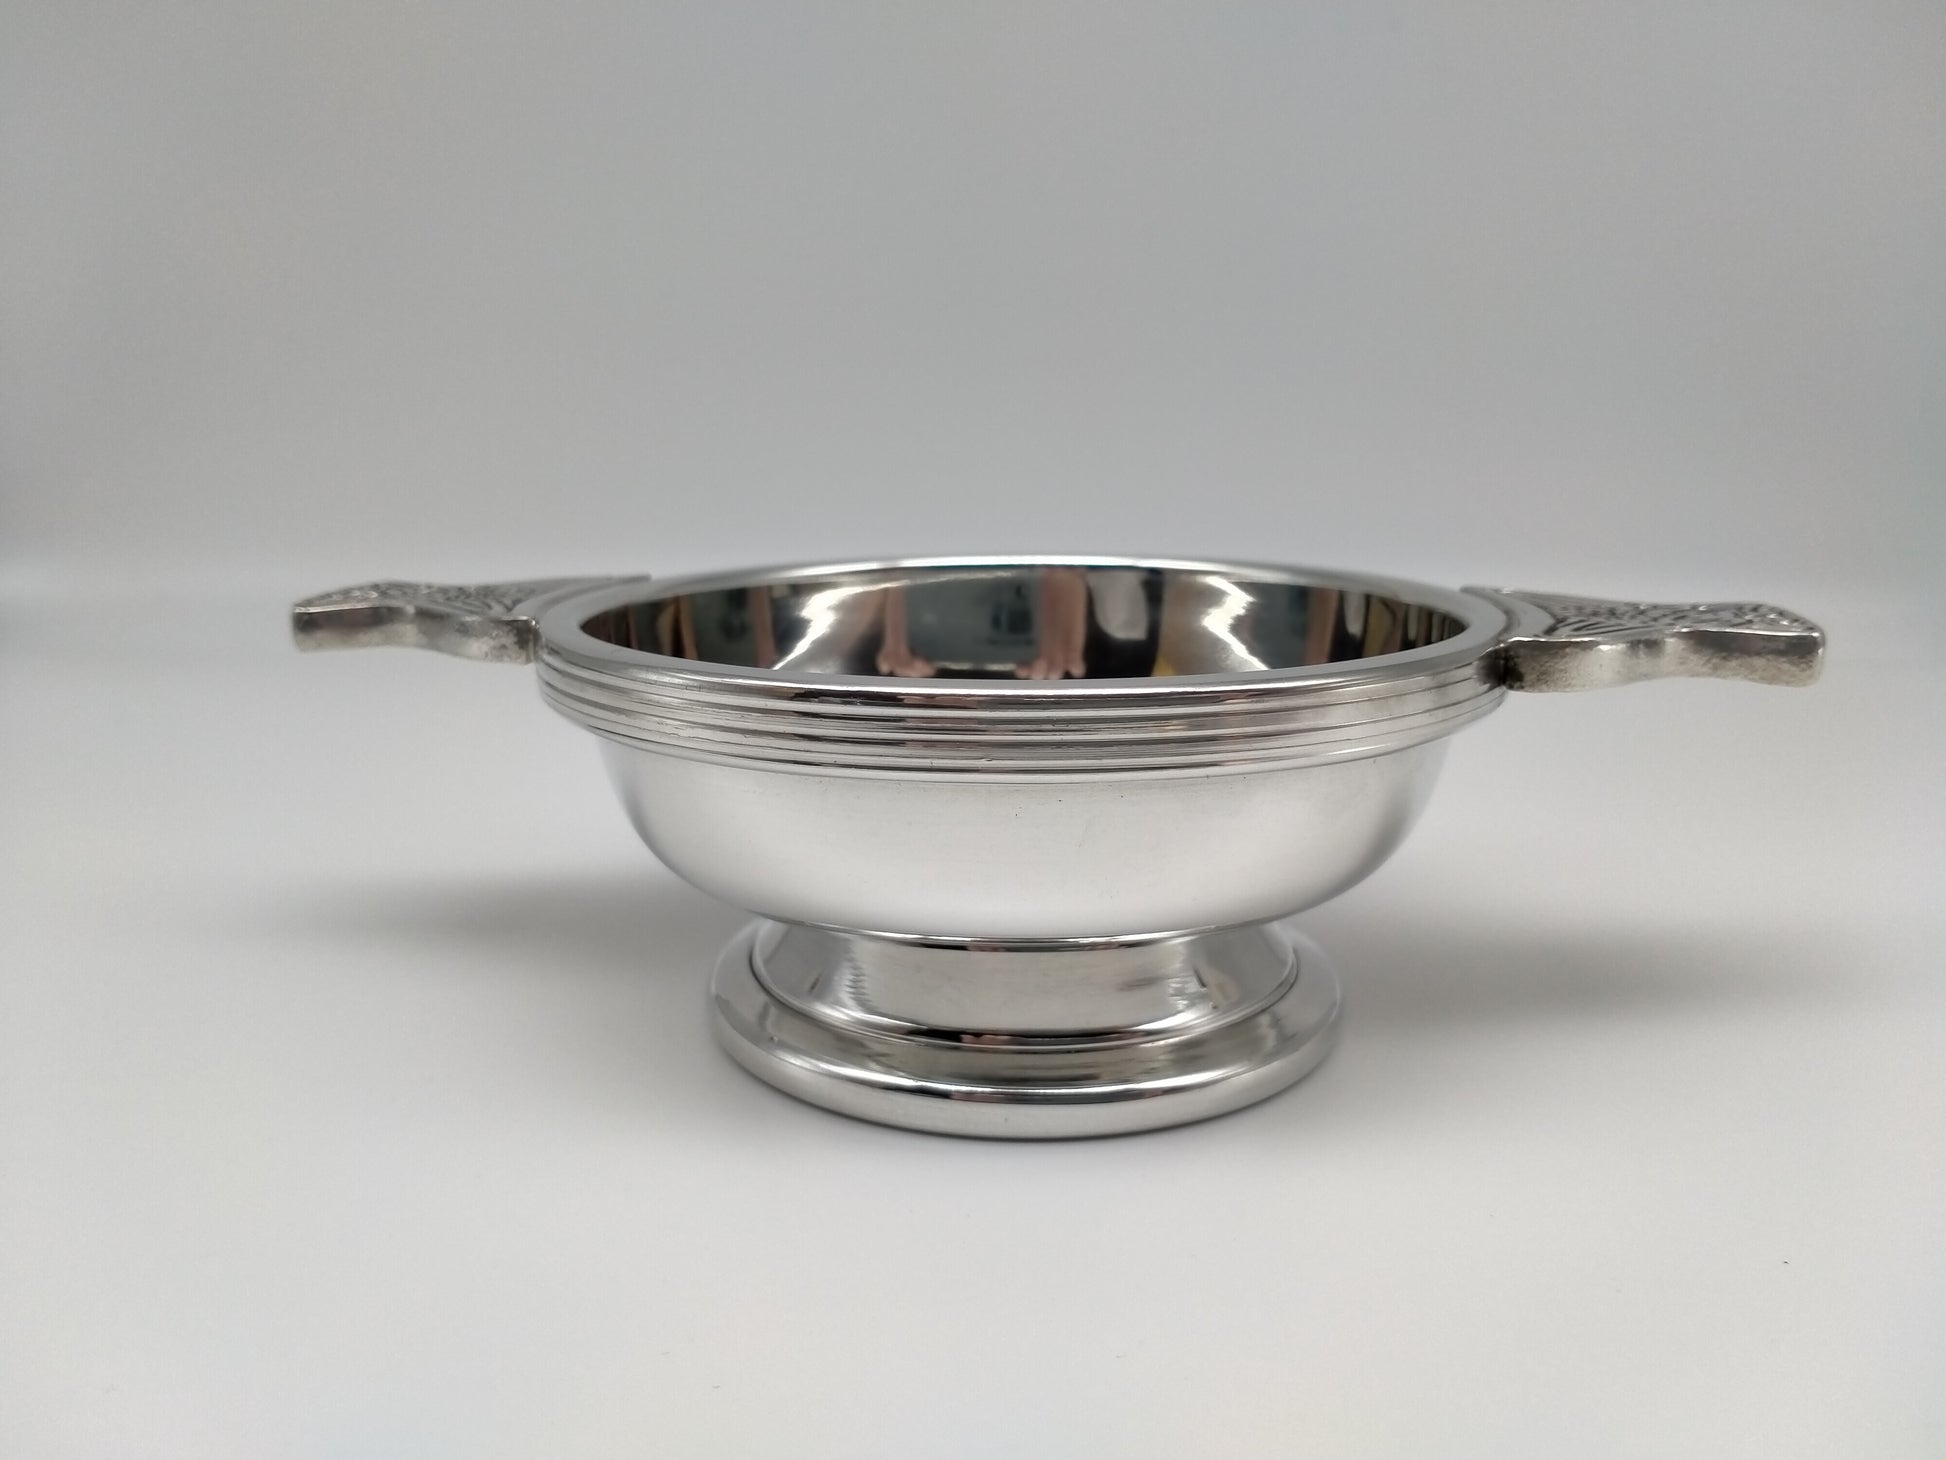 Quaich photographed from the side.